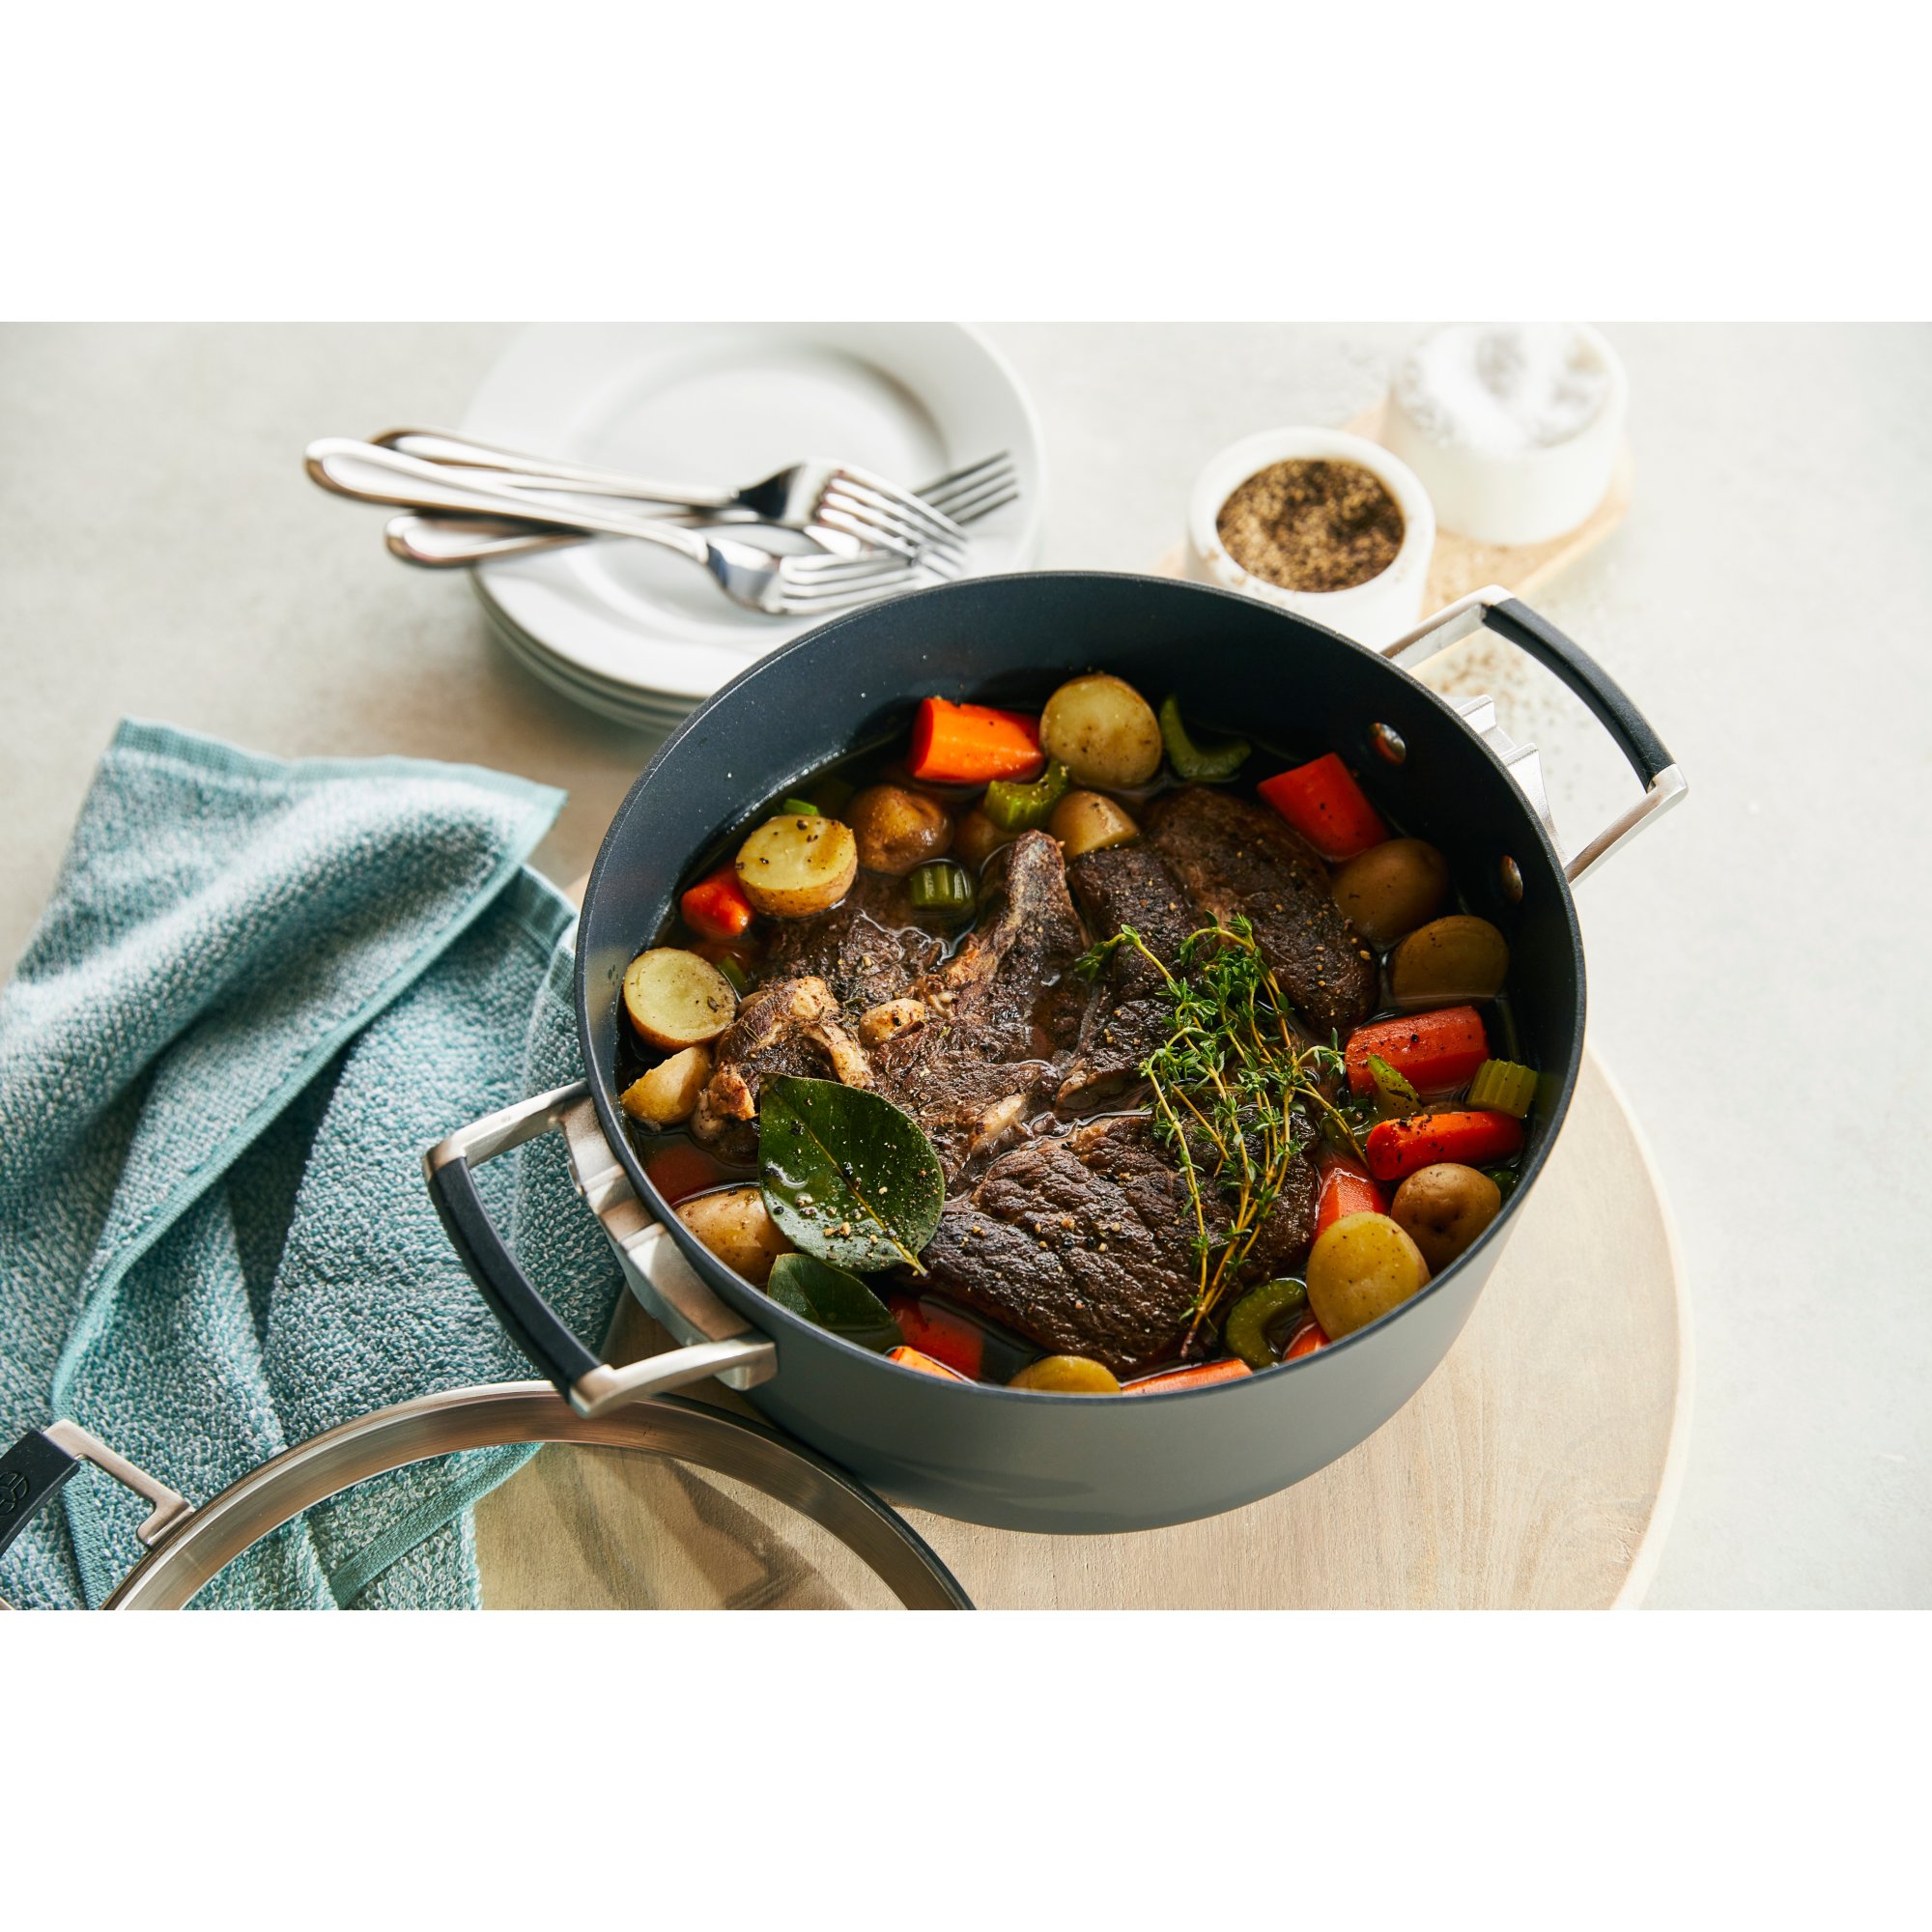 https://newellbrands.scene7.com/is/image/NewellRubbermaid/Calphalon-Cookware-Good-Tier-Tempered-Glass-Lids-Select-Space-Saving-straight-on-slightly-high-with-talnt-with-food-3?wid=2000&hei=2000